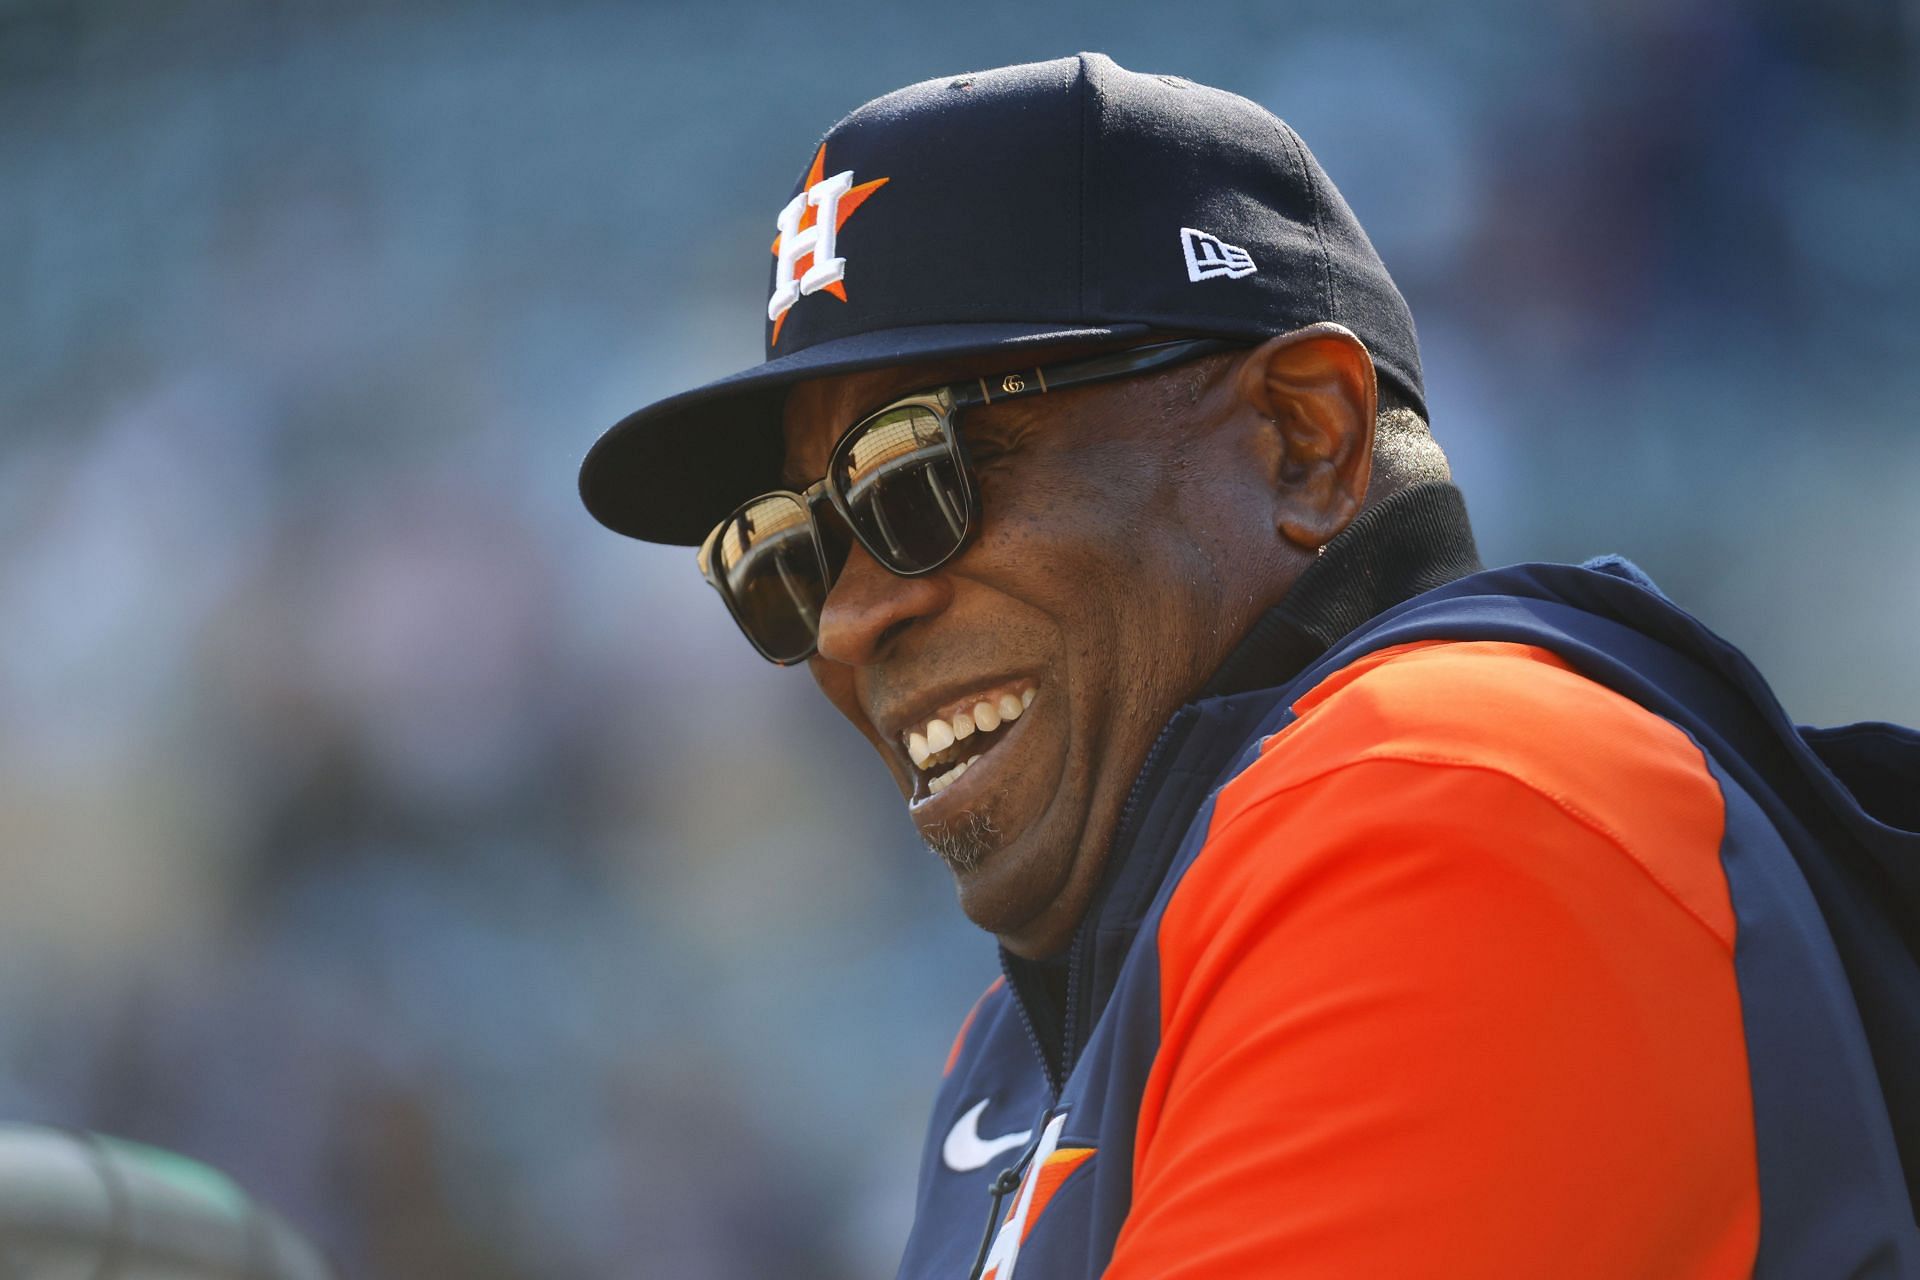 Houston manager Dusty Baker Jr. watches batting practice before a game against the Minnesota Twins in Minneapolis